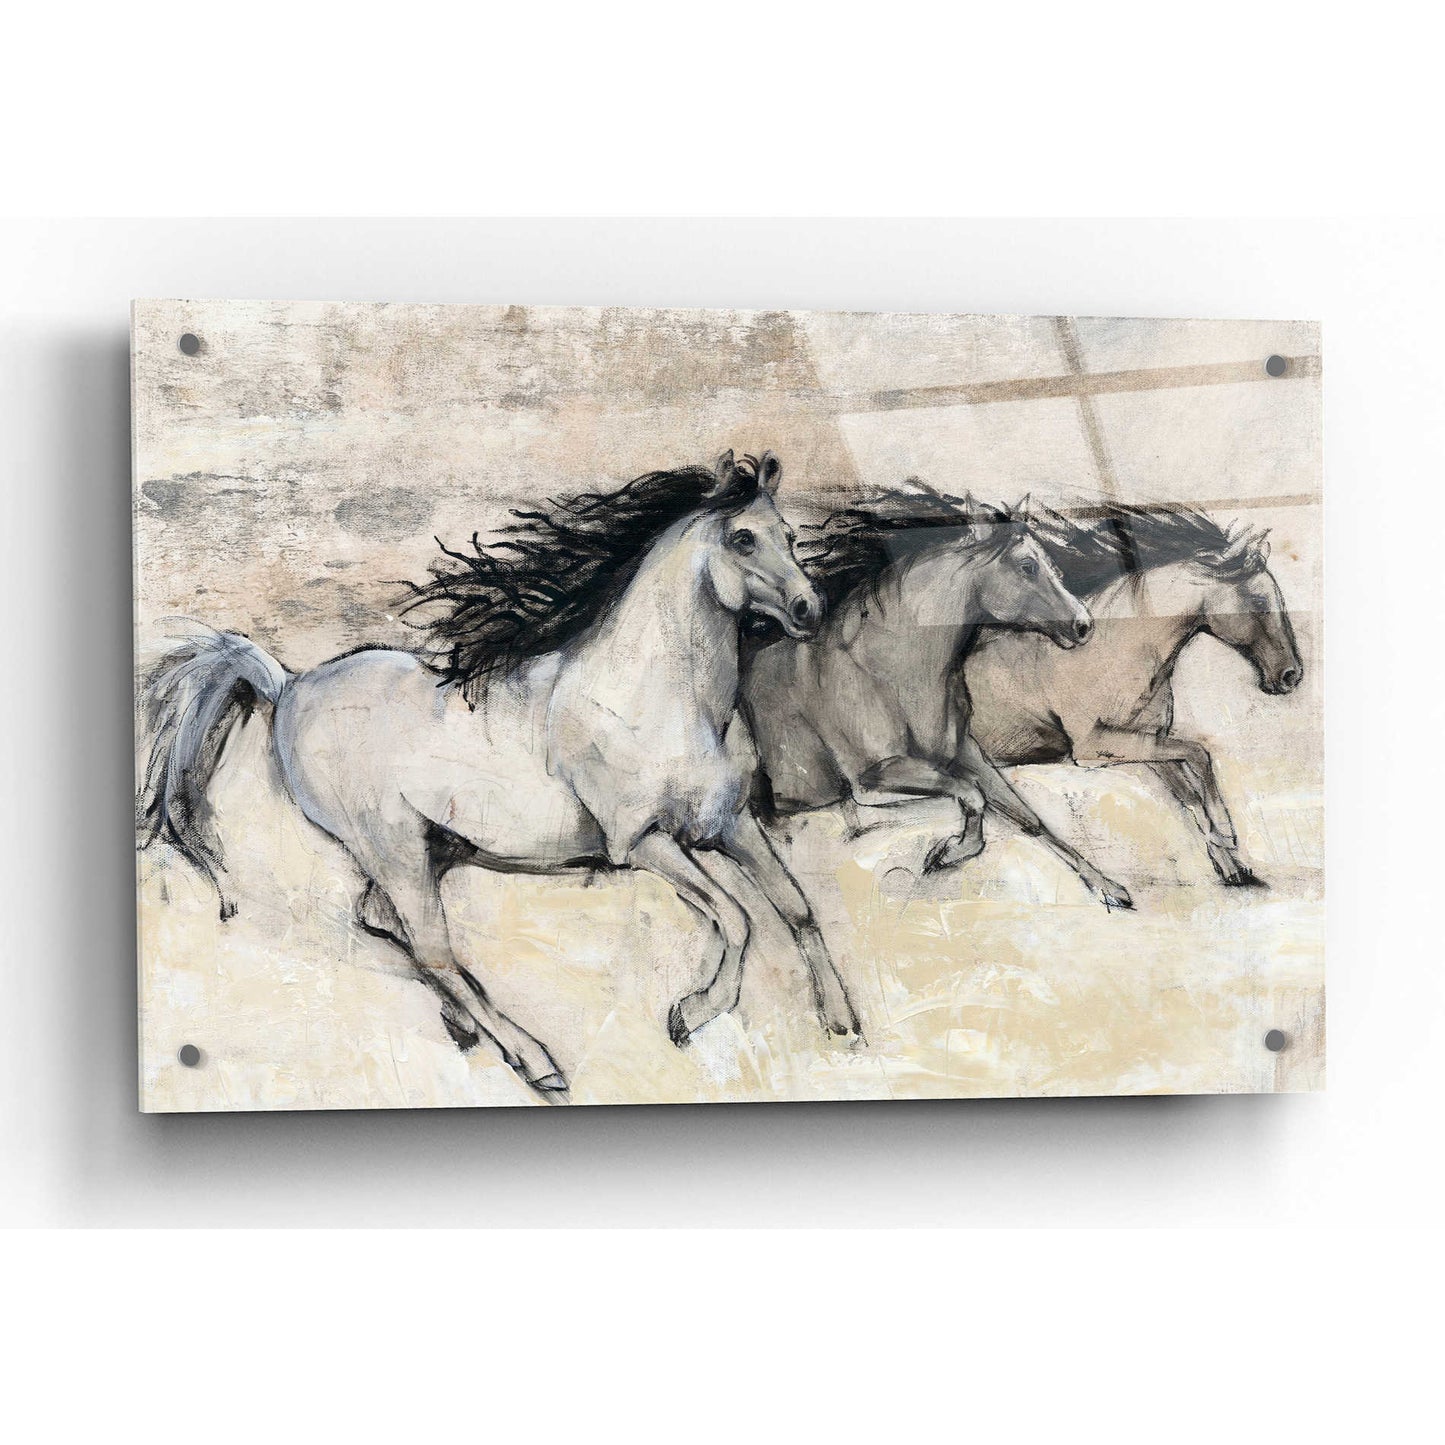 Epic Art 'Horses in Motion II' by Tim O'Toole, Acrylic Glass Wall Art,36x24